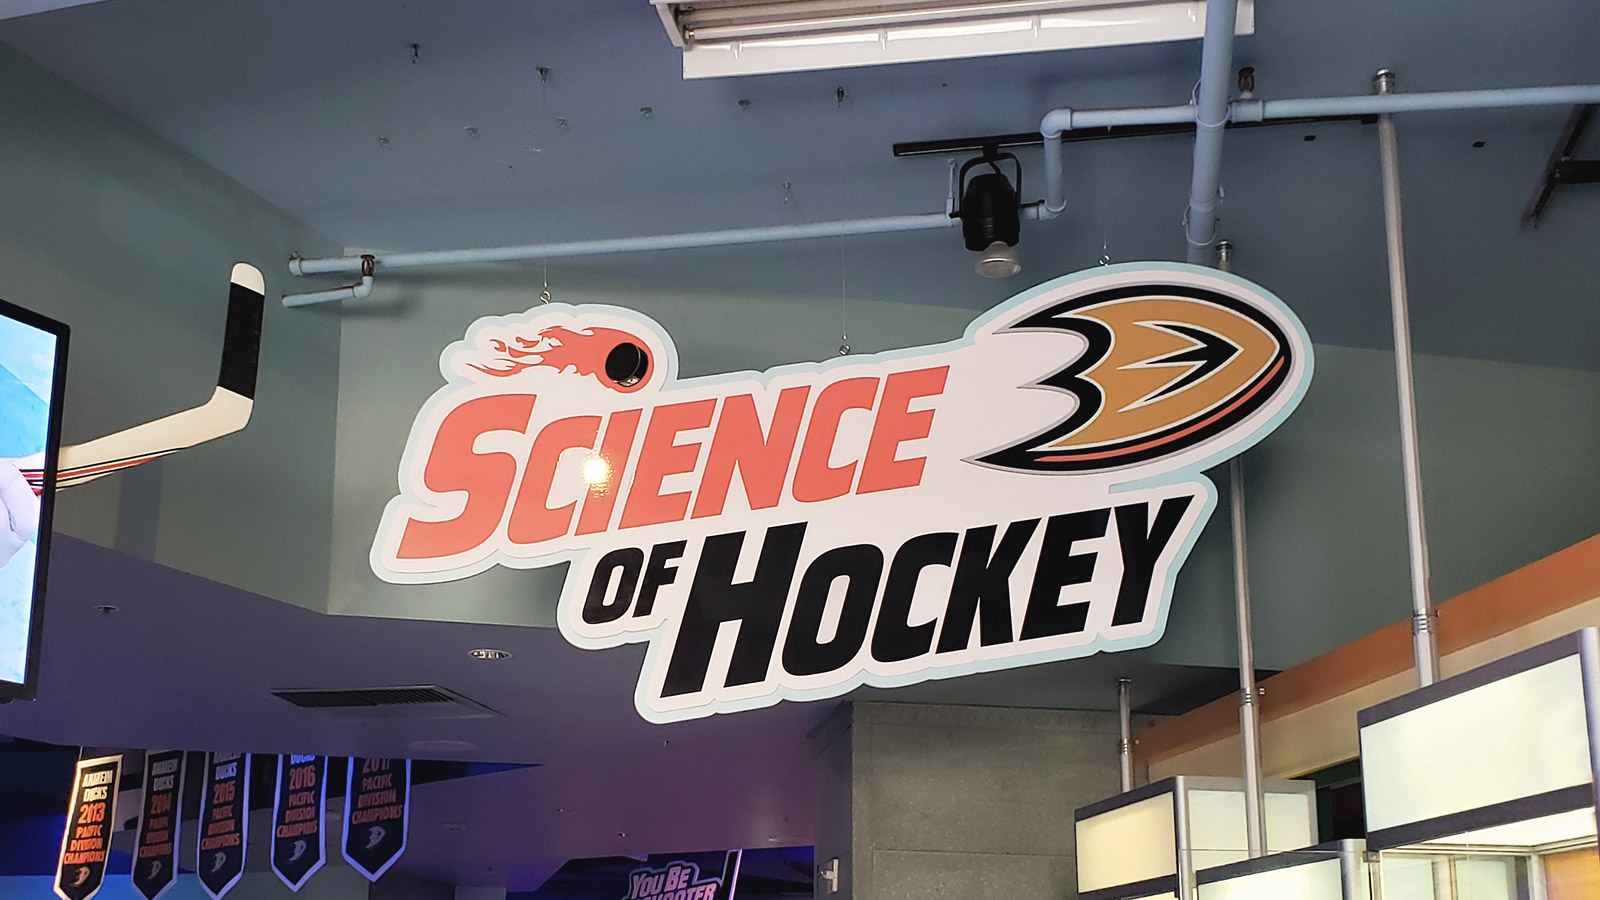 science of hockey acrylic hanging sign